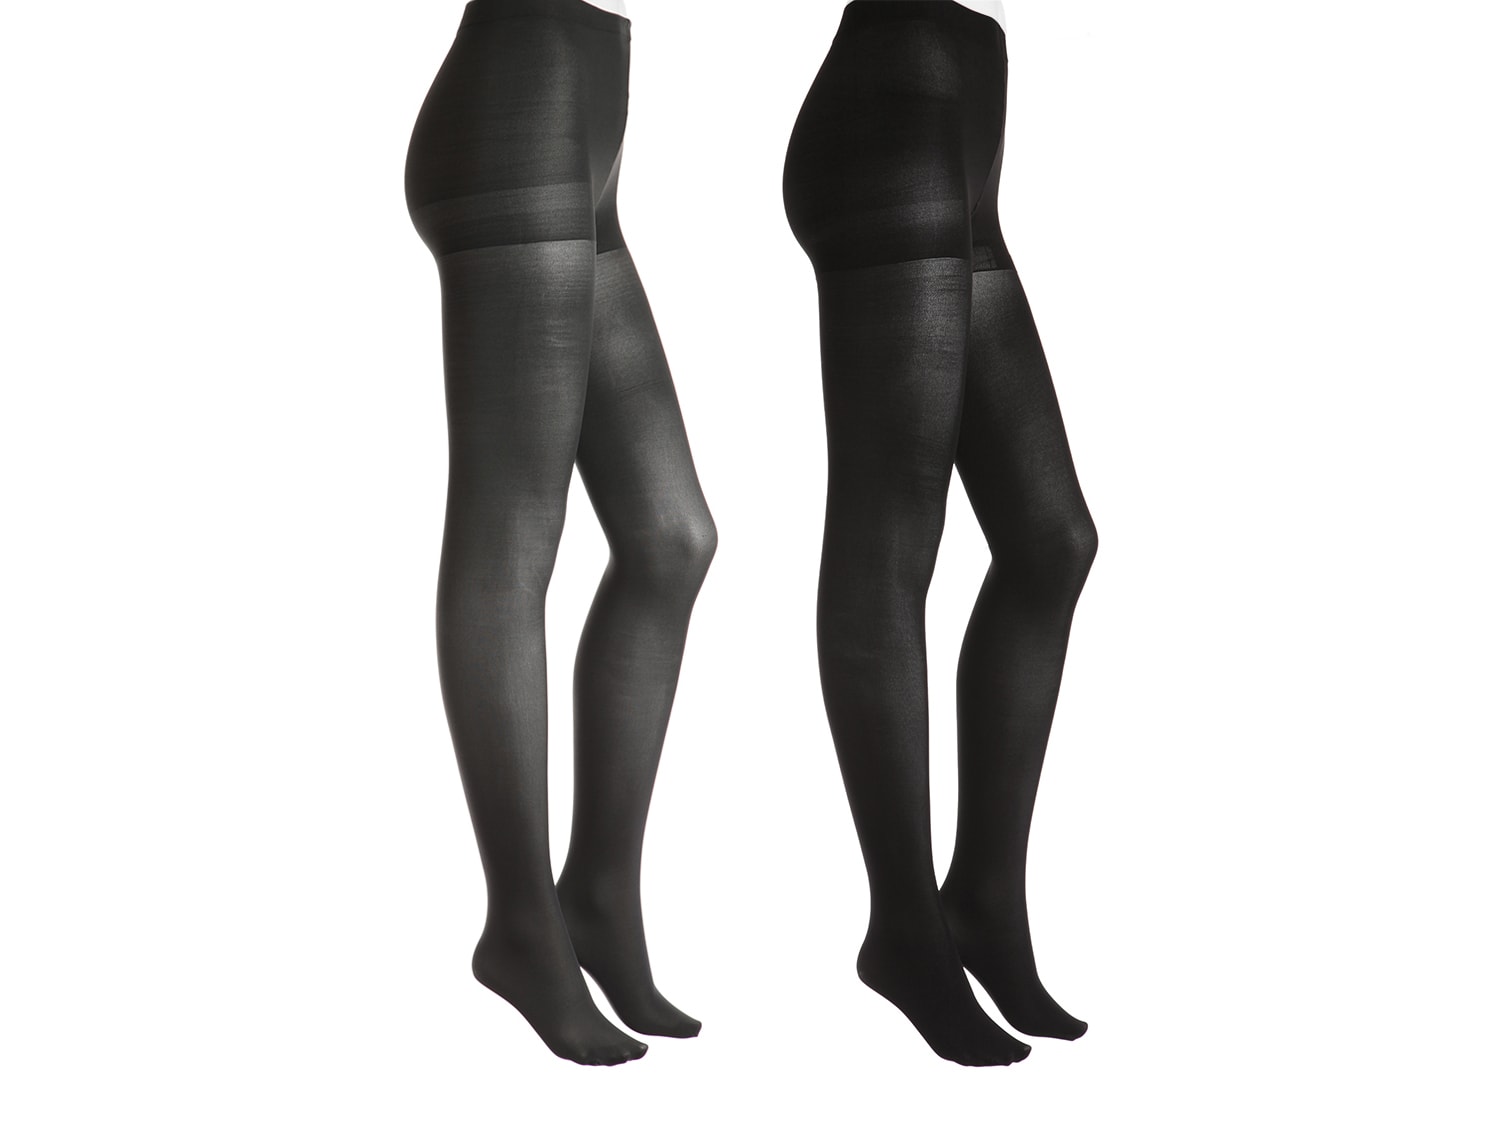 Hue Opaque Texture With Control Top Black Tights 1 Pair Women's Size 2 -  beyond exchange